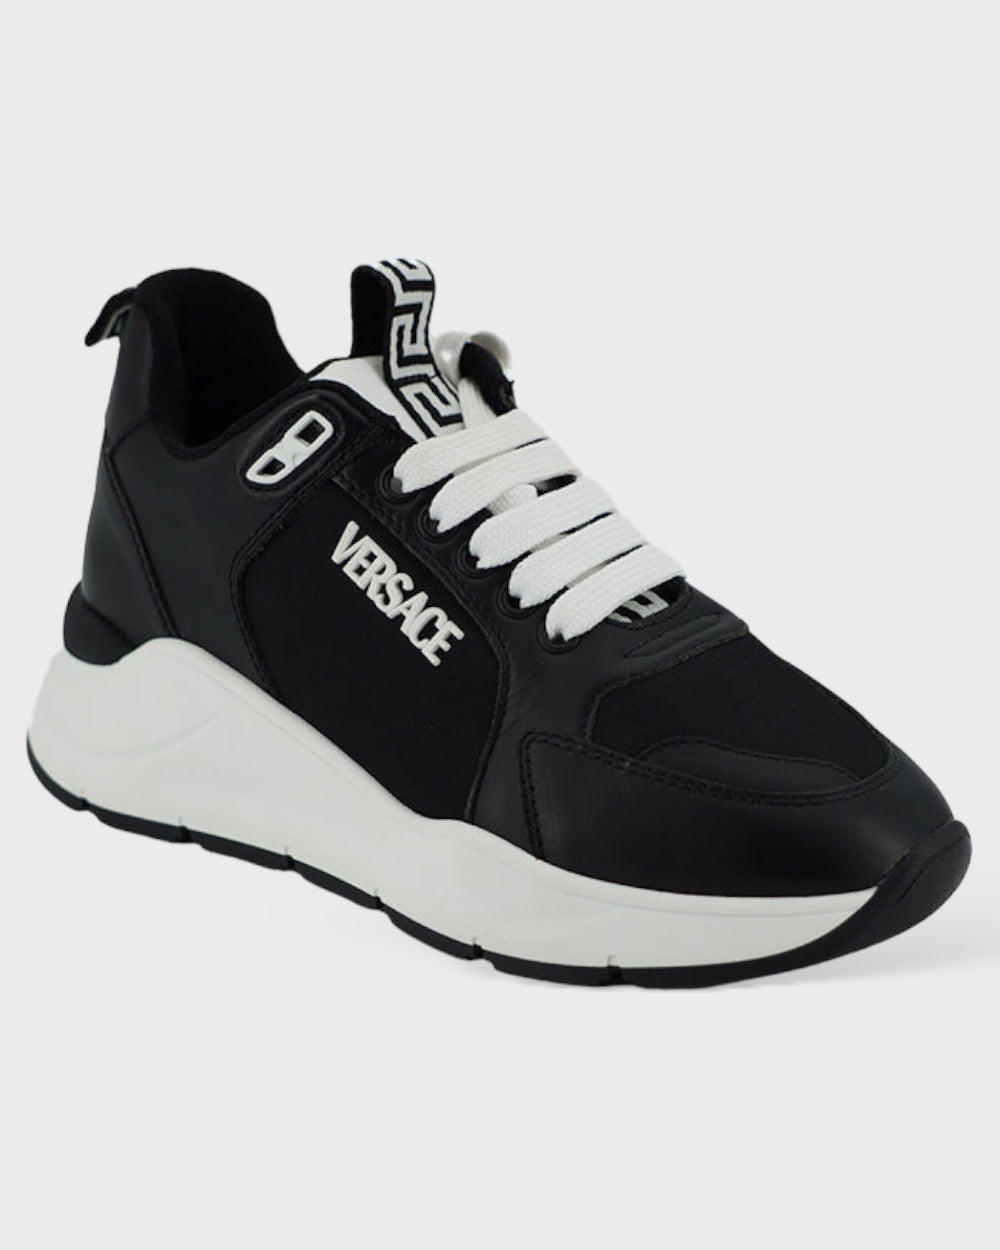 Versace Black and White Calf Leather Sneakers